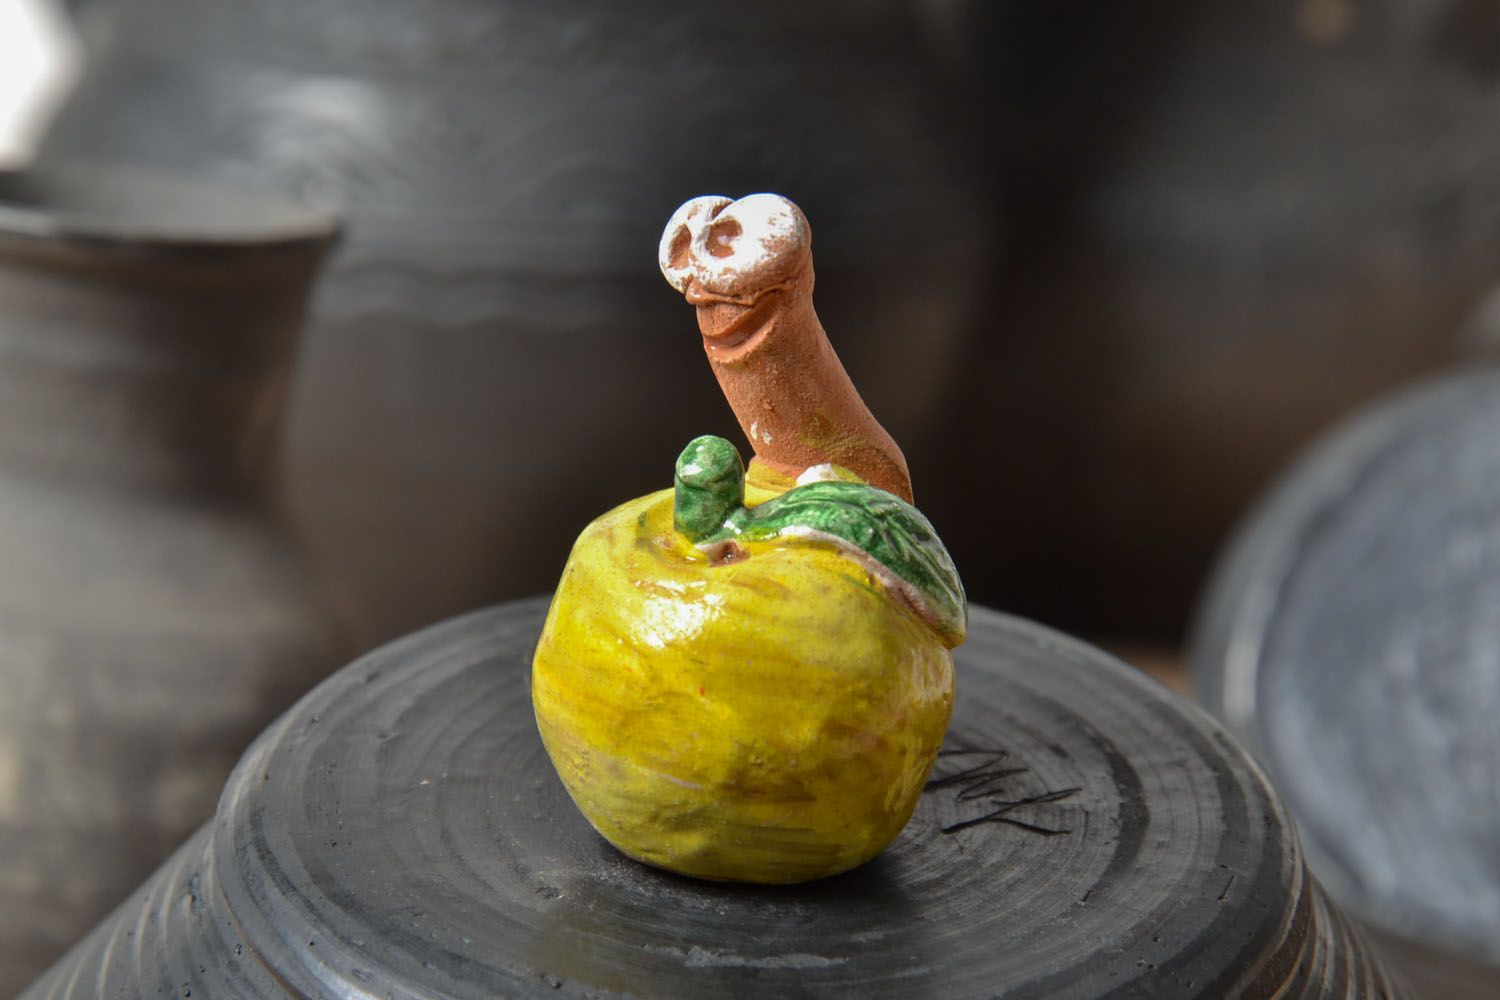 Clay statuette Worm in Apple photo 1